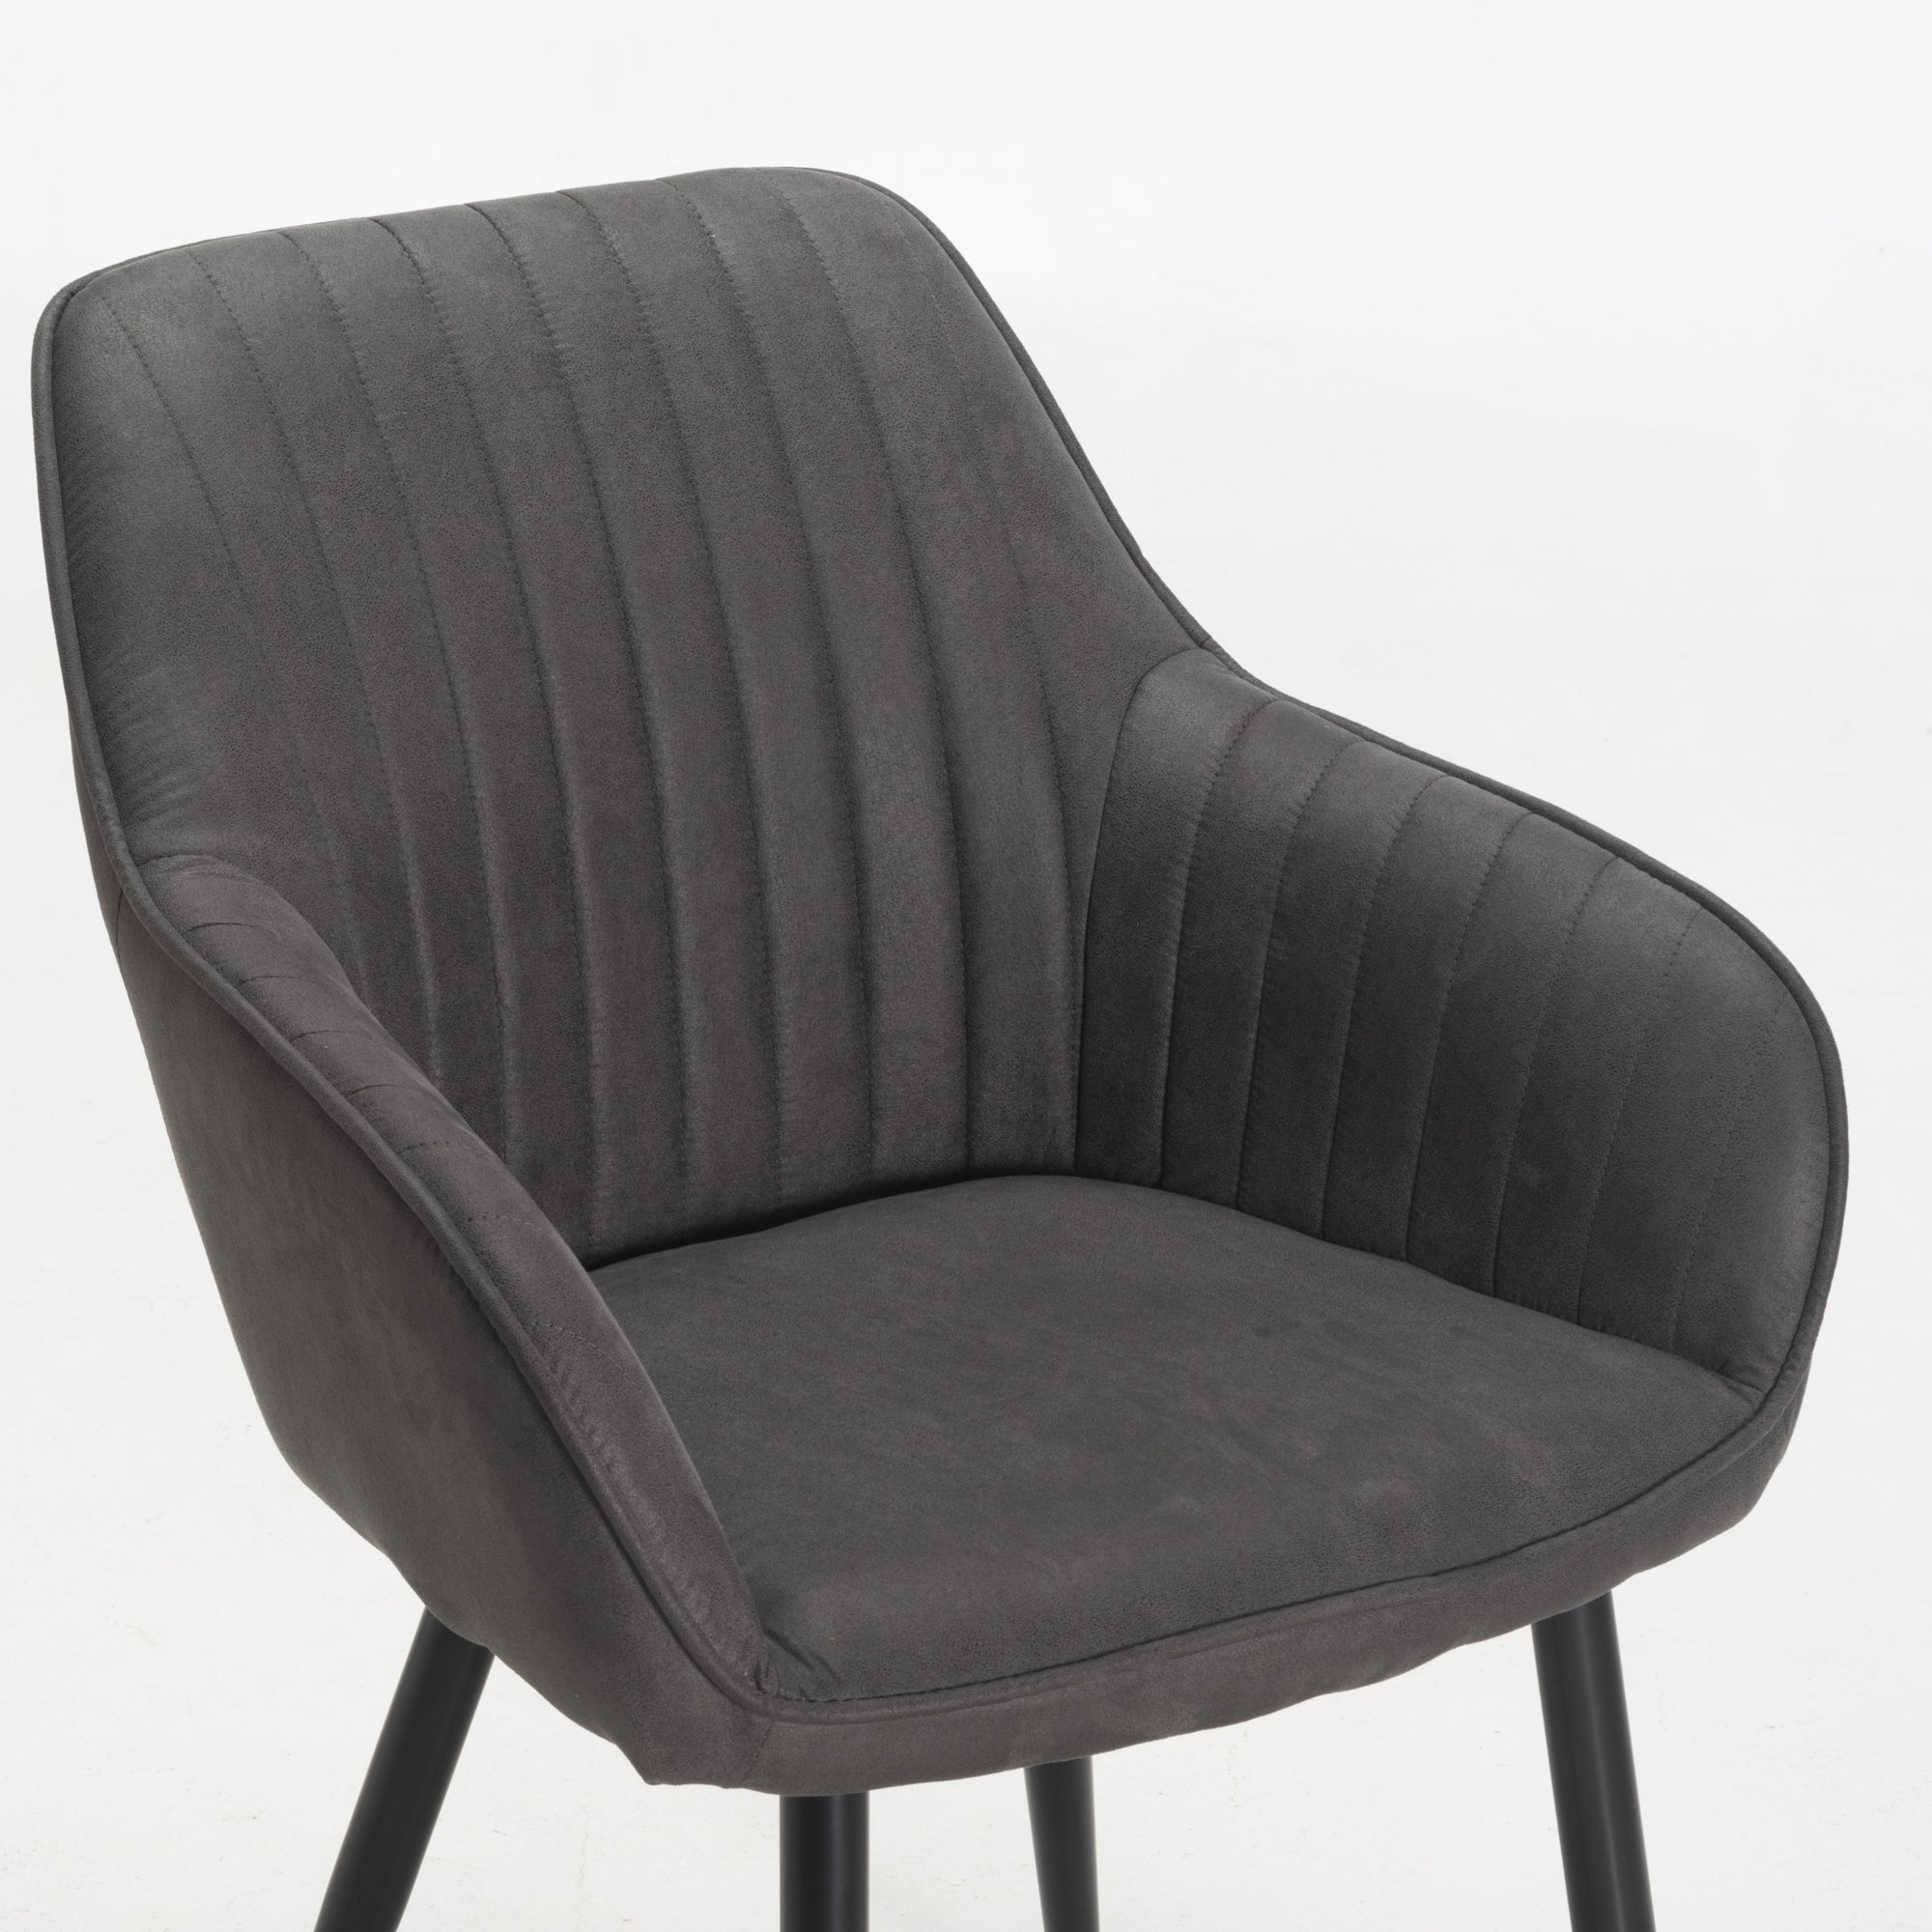 ROCCO FABRIC DINING CHAIR - GREY